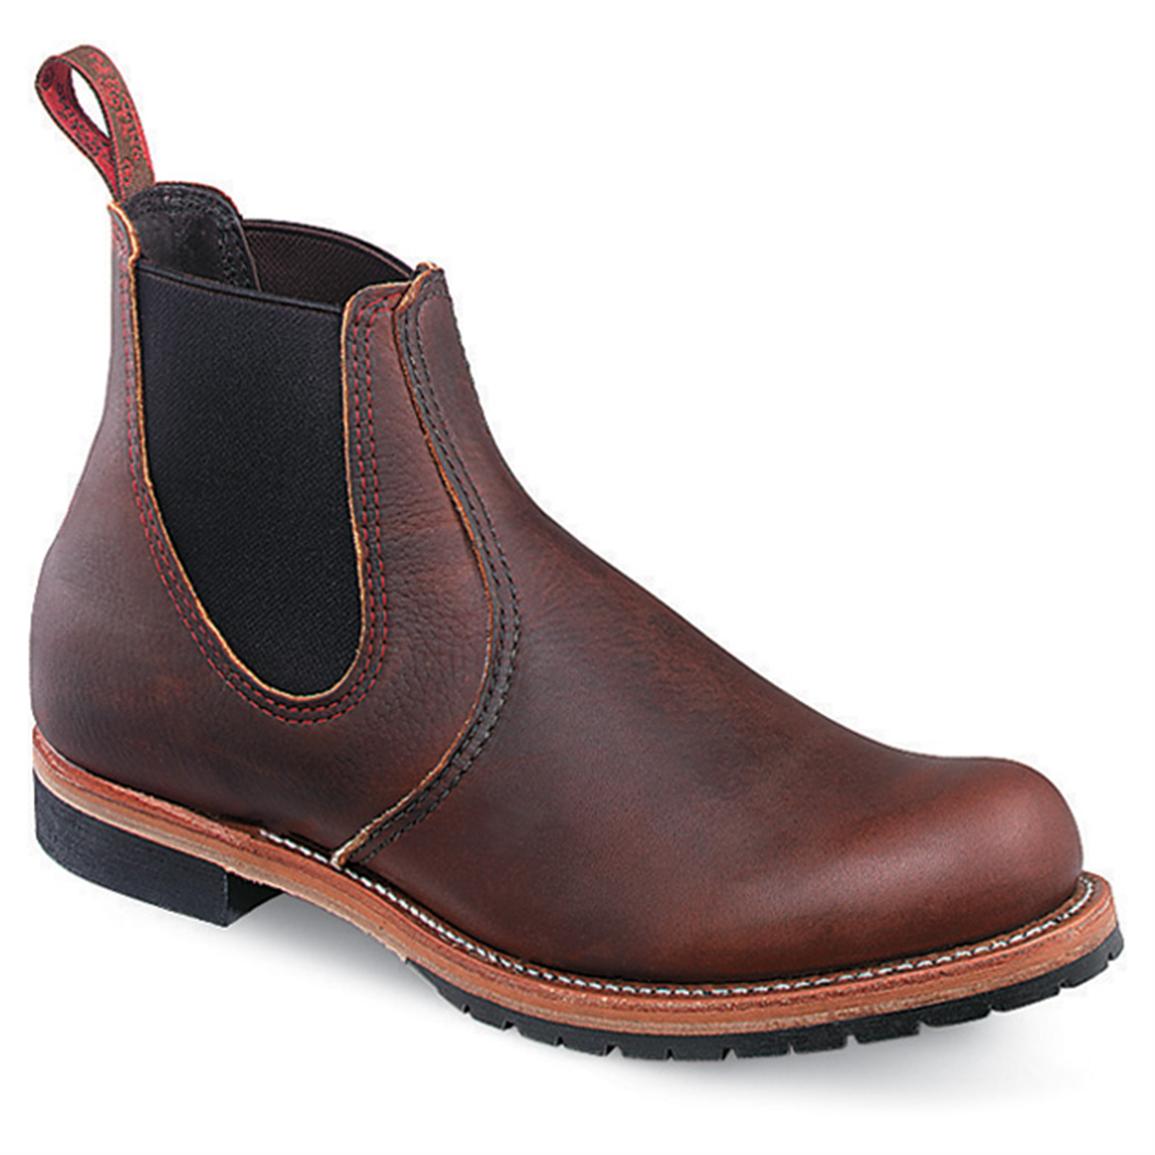 Men's Red WingÂ® Chelsea Boots - 148410, Work Boots at Sportsman's Guide